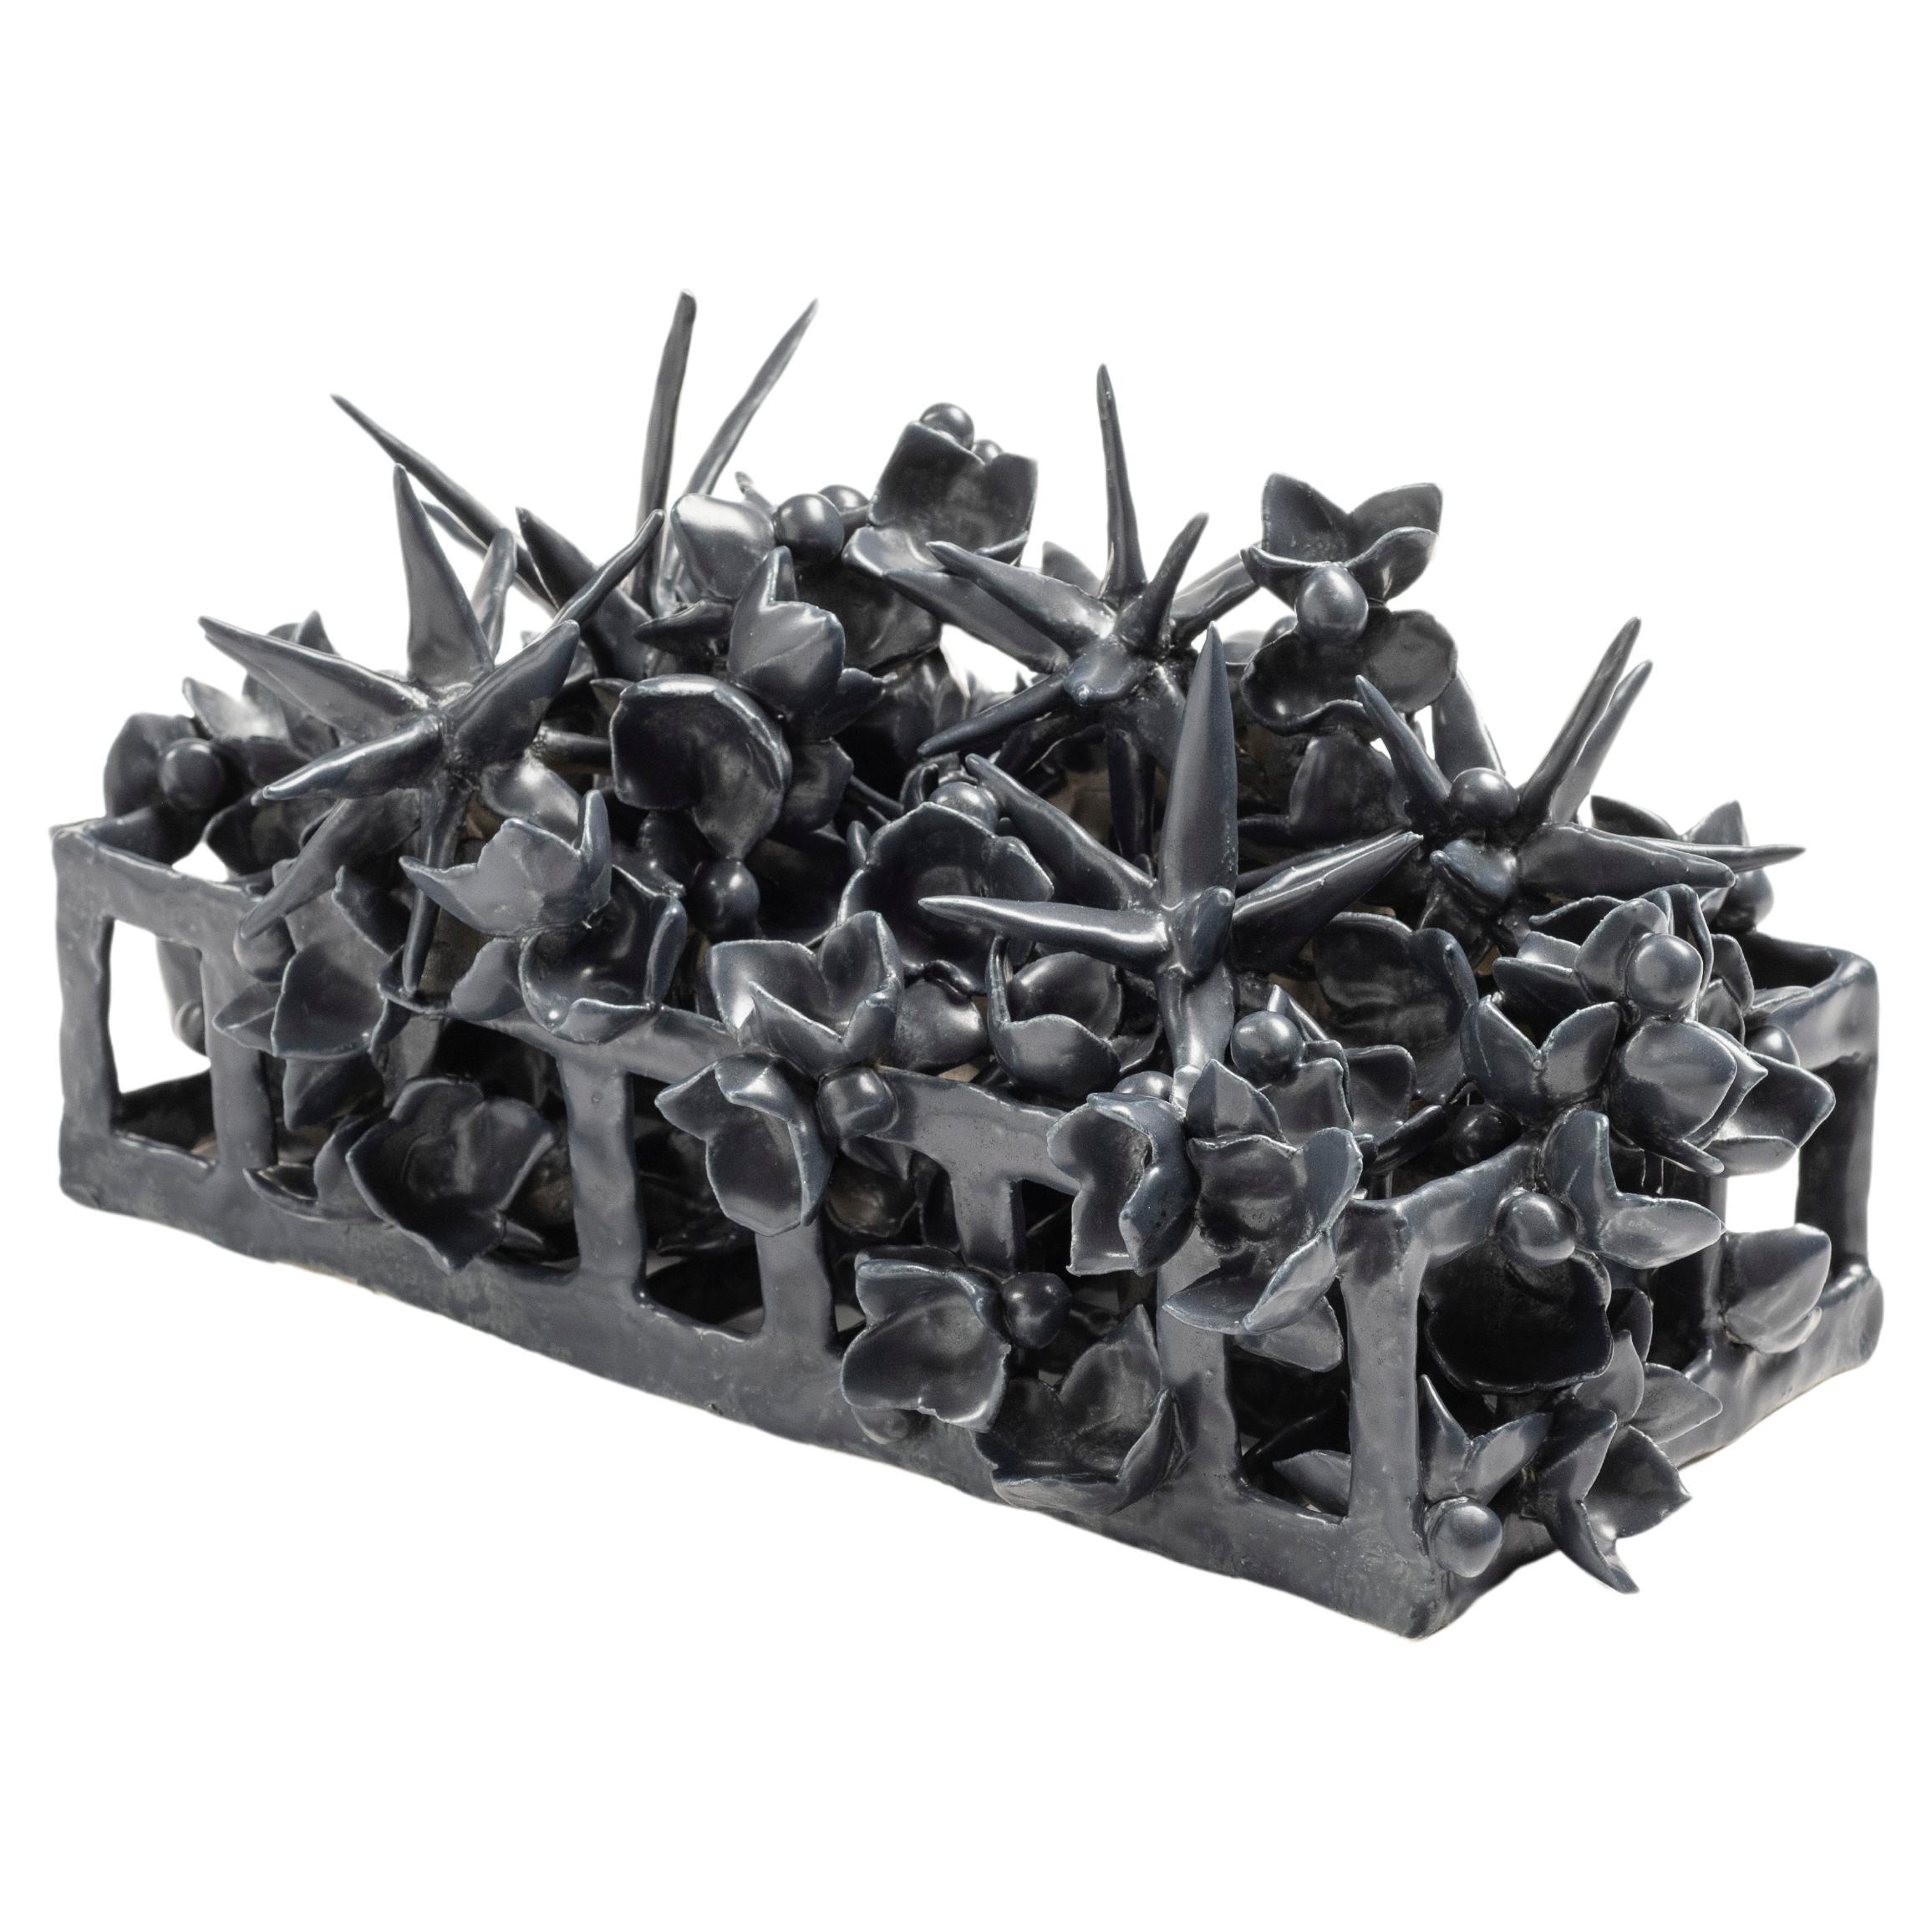 Joanna Poag Binding Time (Black Grid with Stars) Ceramic Sculpture, 2020 For Sale